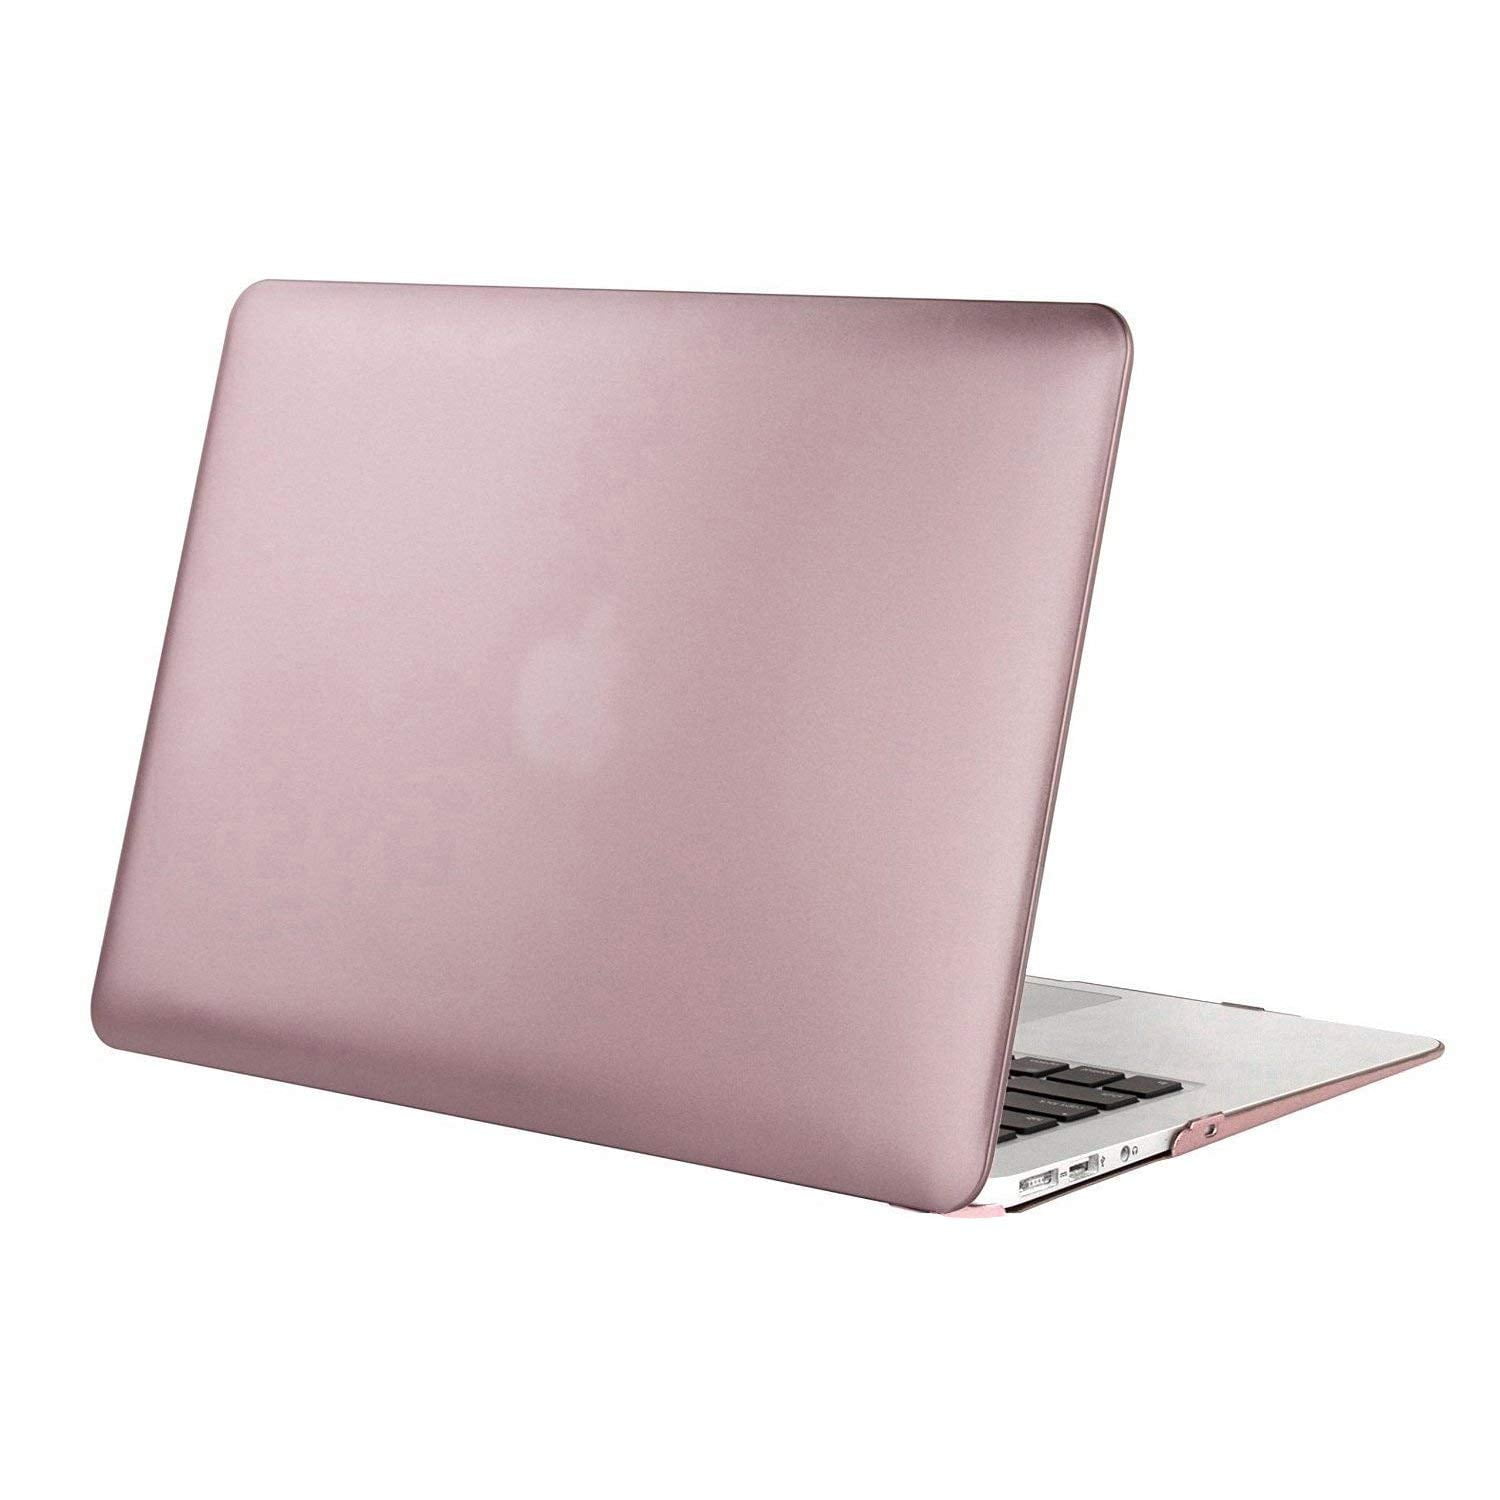 Mosiso Laptop Plastic Hard Cover Case For Macbook Air 13 Inch A1466 A1369 2010 2017 Only Rose Gold Walmart Com Walmart Com